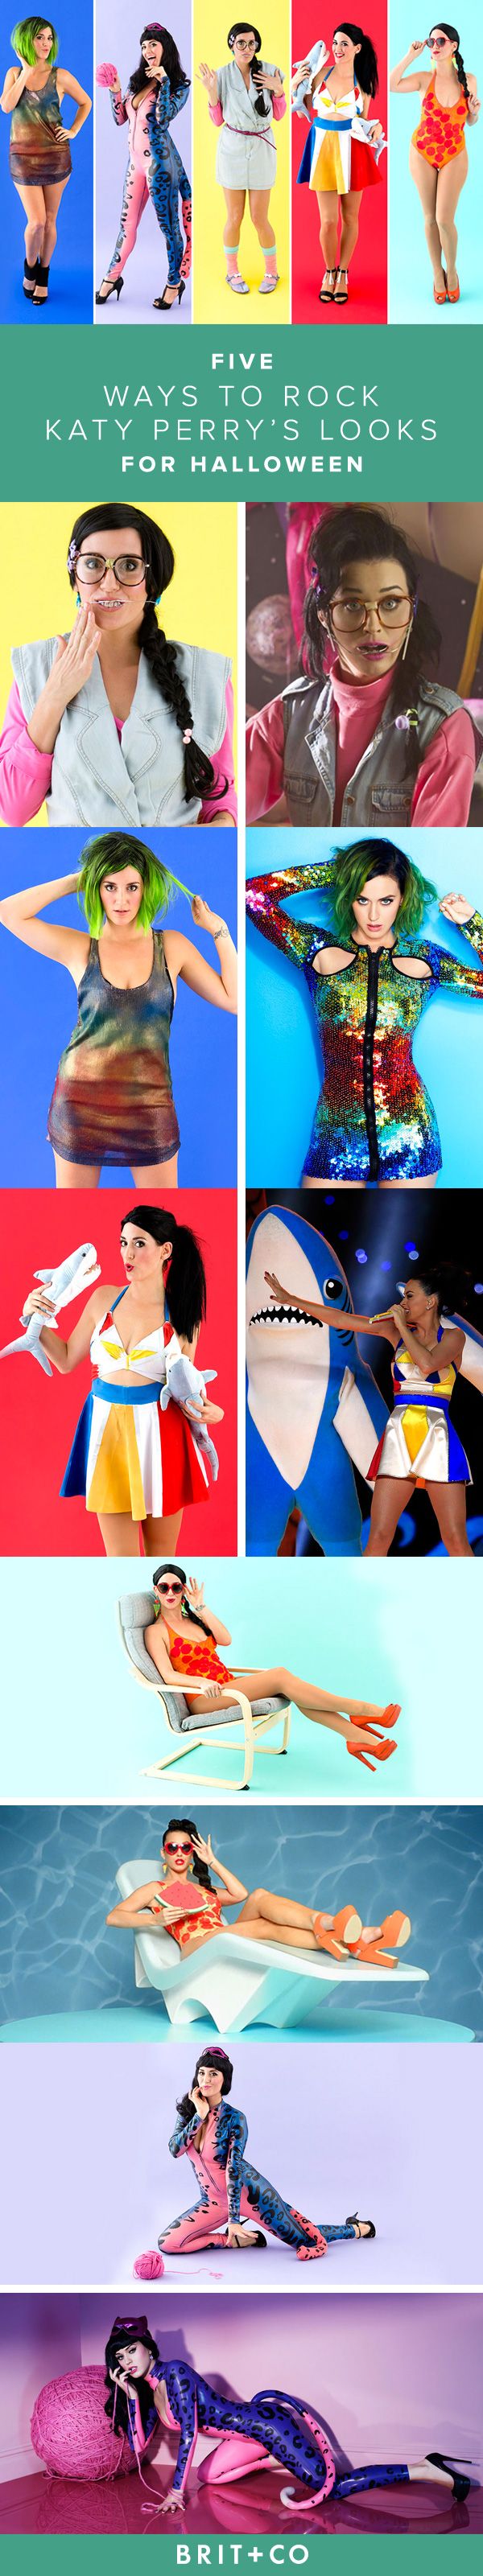 Live your teenage dream this Halloween in a Katy Perry costume.